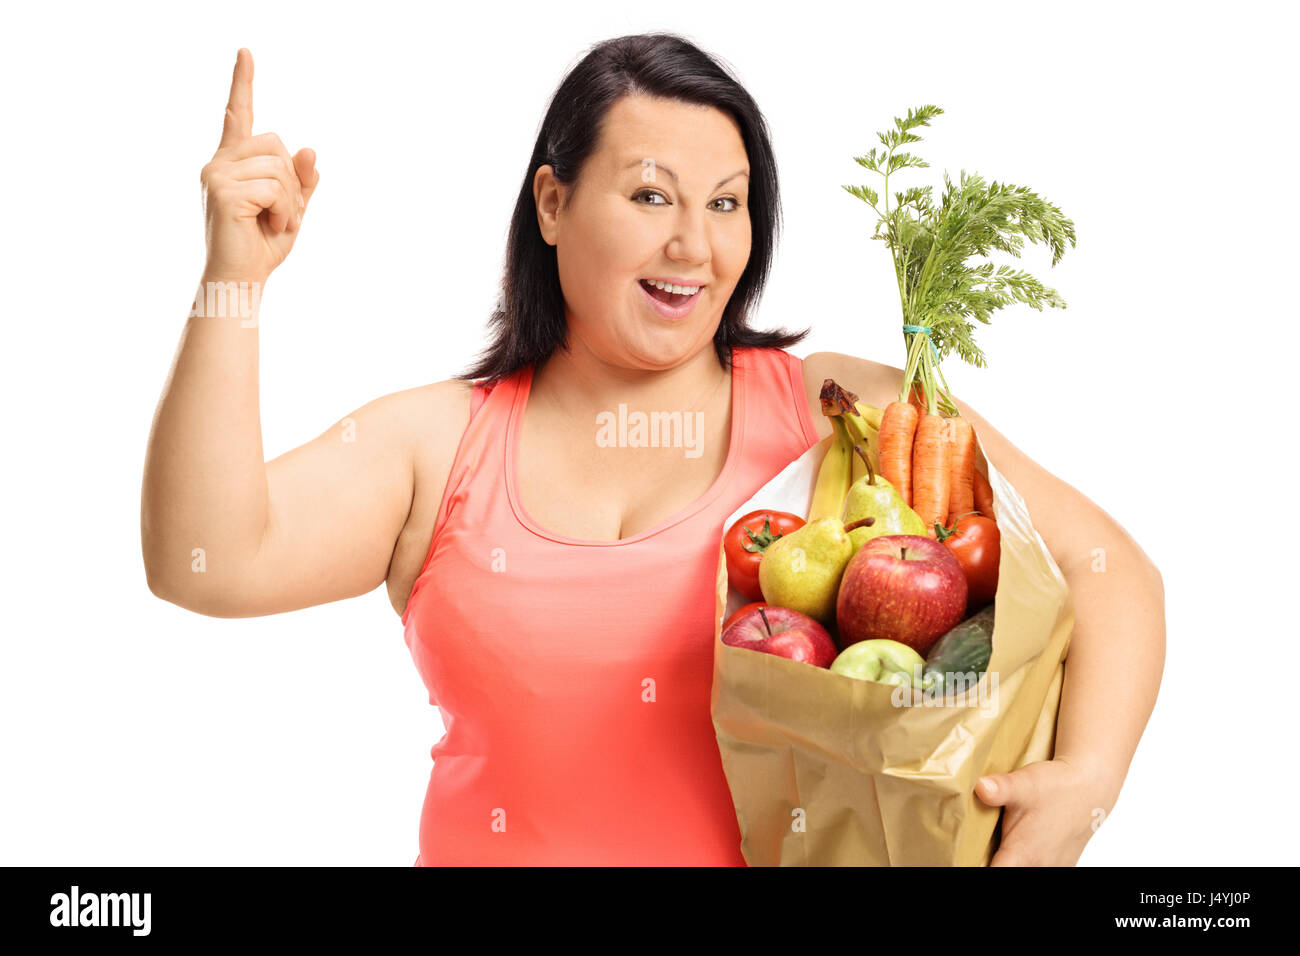 Happy overweight woman with a paper bag filled with groceries holding her finger up isolated on white background Stock Photo